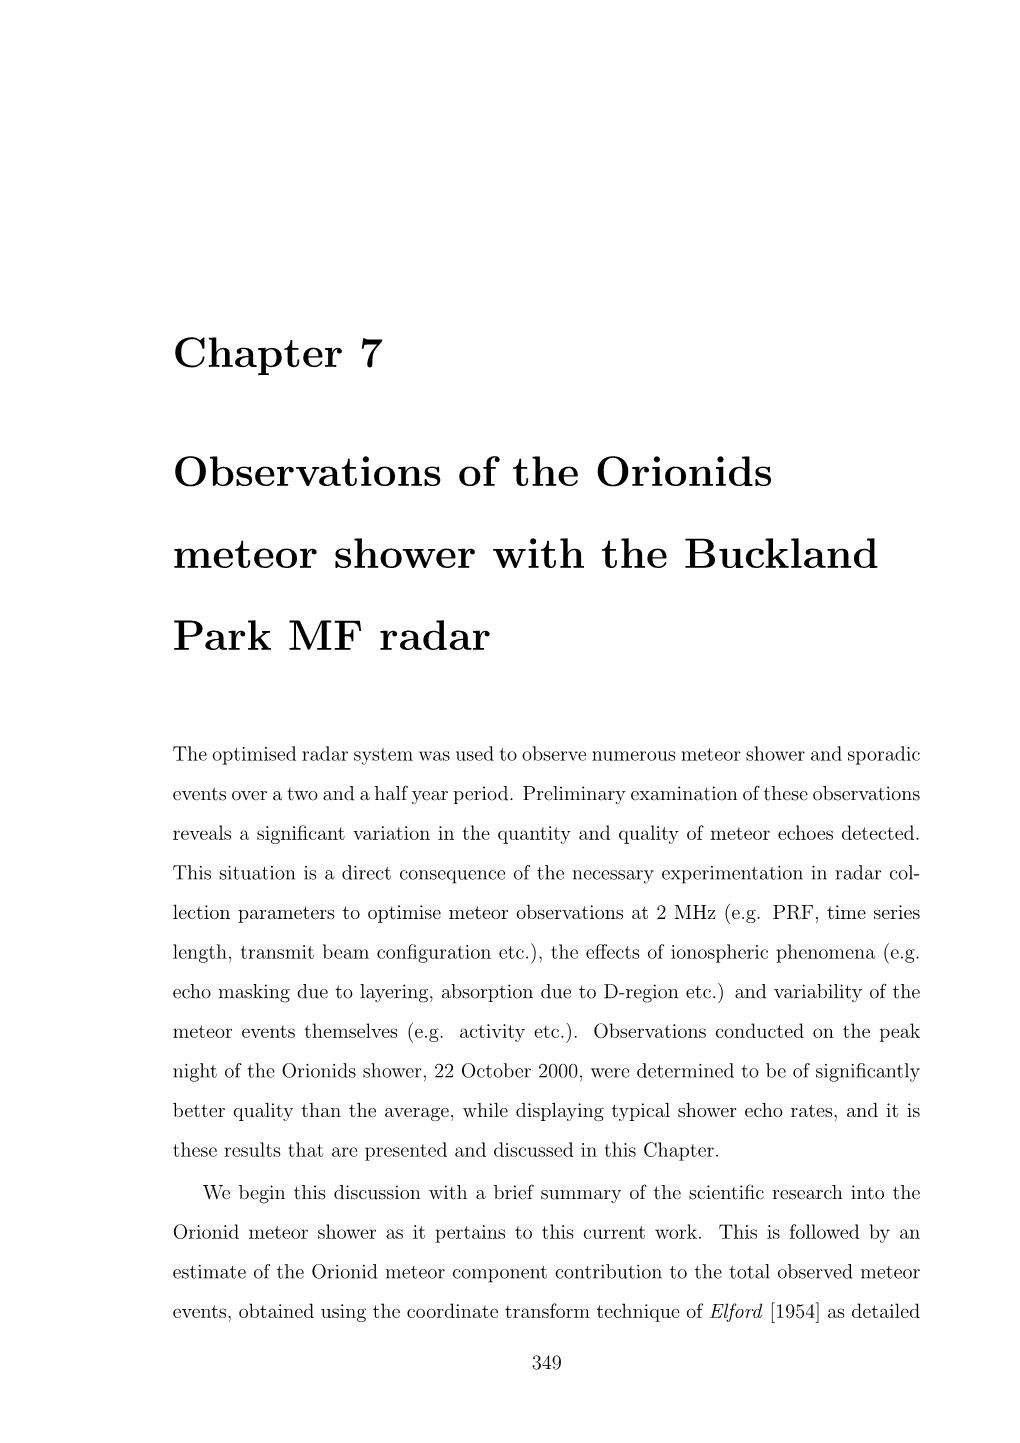 Chapter 7 Observations of the Orionids Meteor Shower with The